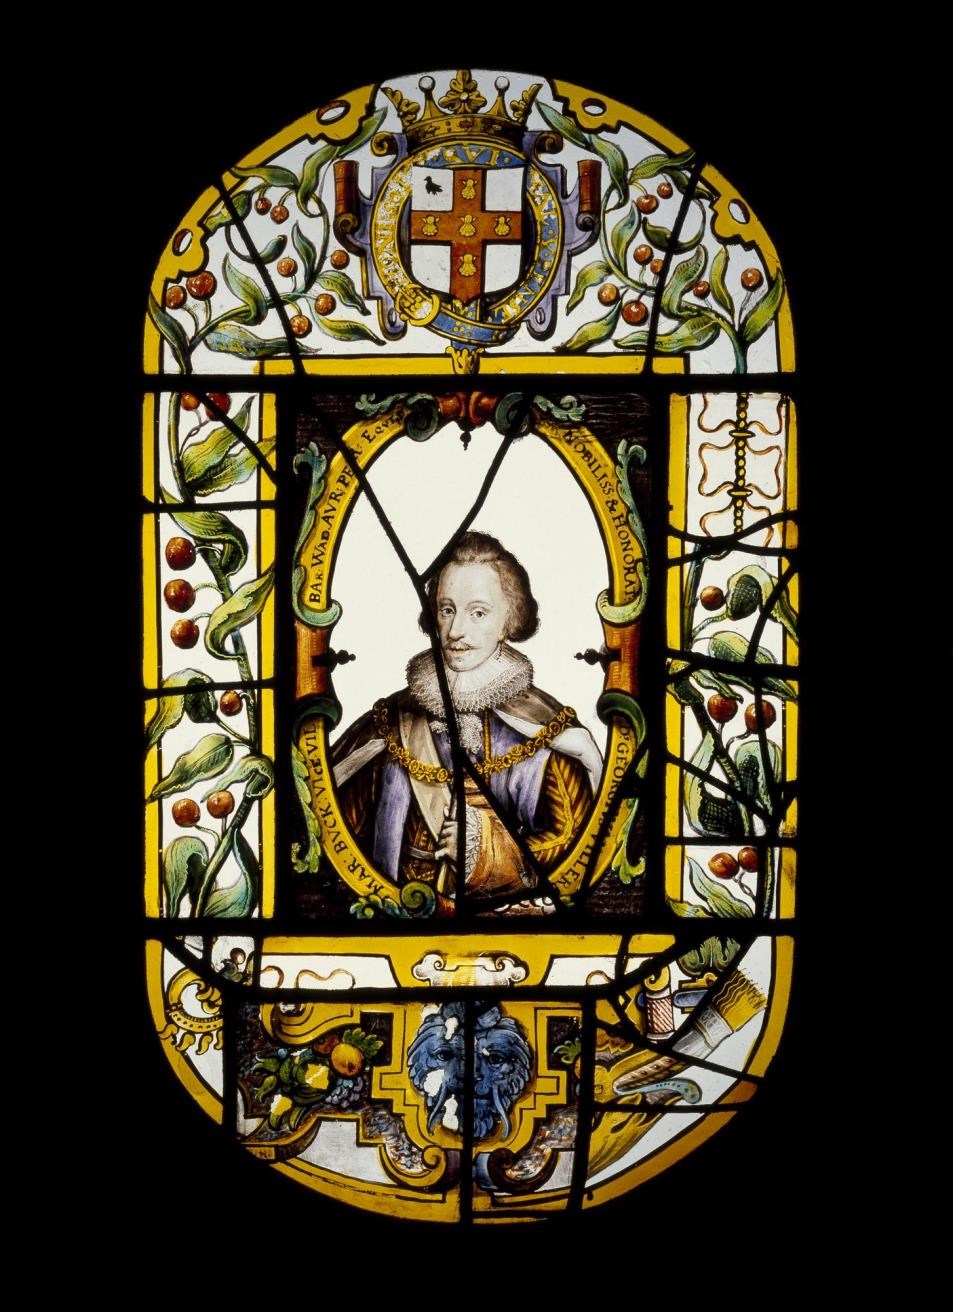 Stained glass panel of the Duke of Buckingham